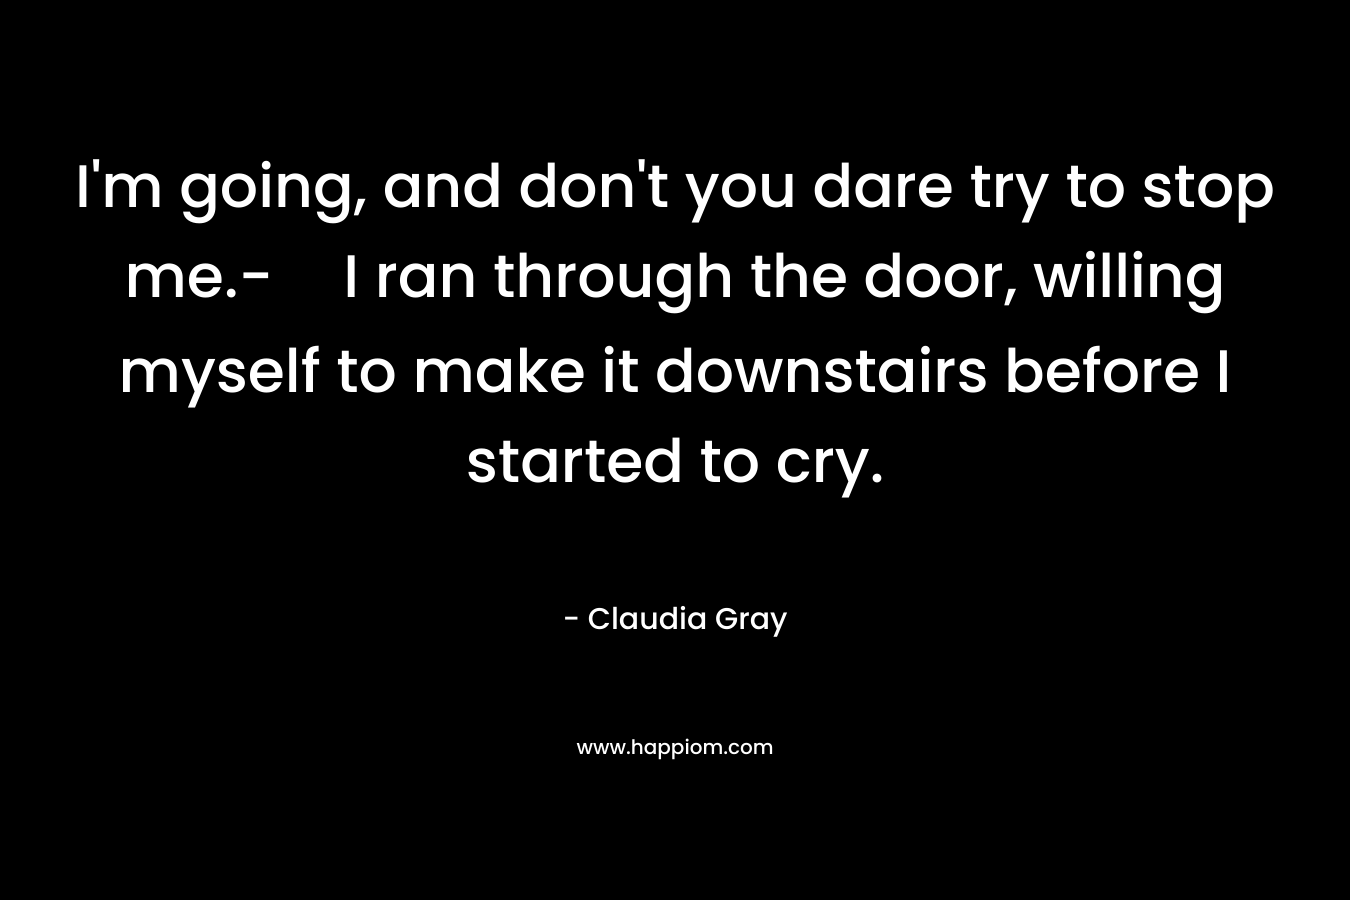 I’m going, and don’t you dare try to stop me.-I ran through the door, willing myself to make it downstairs before I started to cry. – Claudia Gray